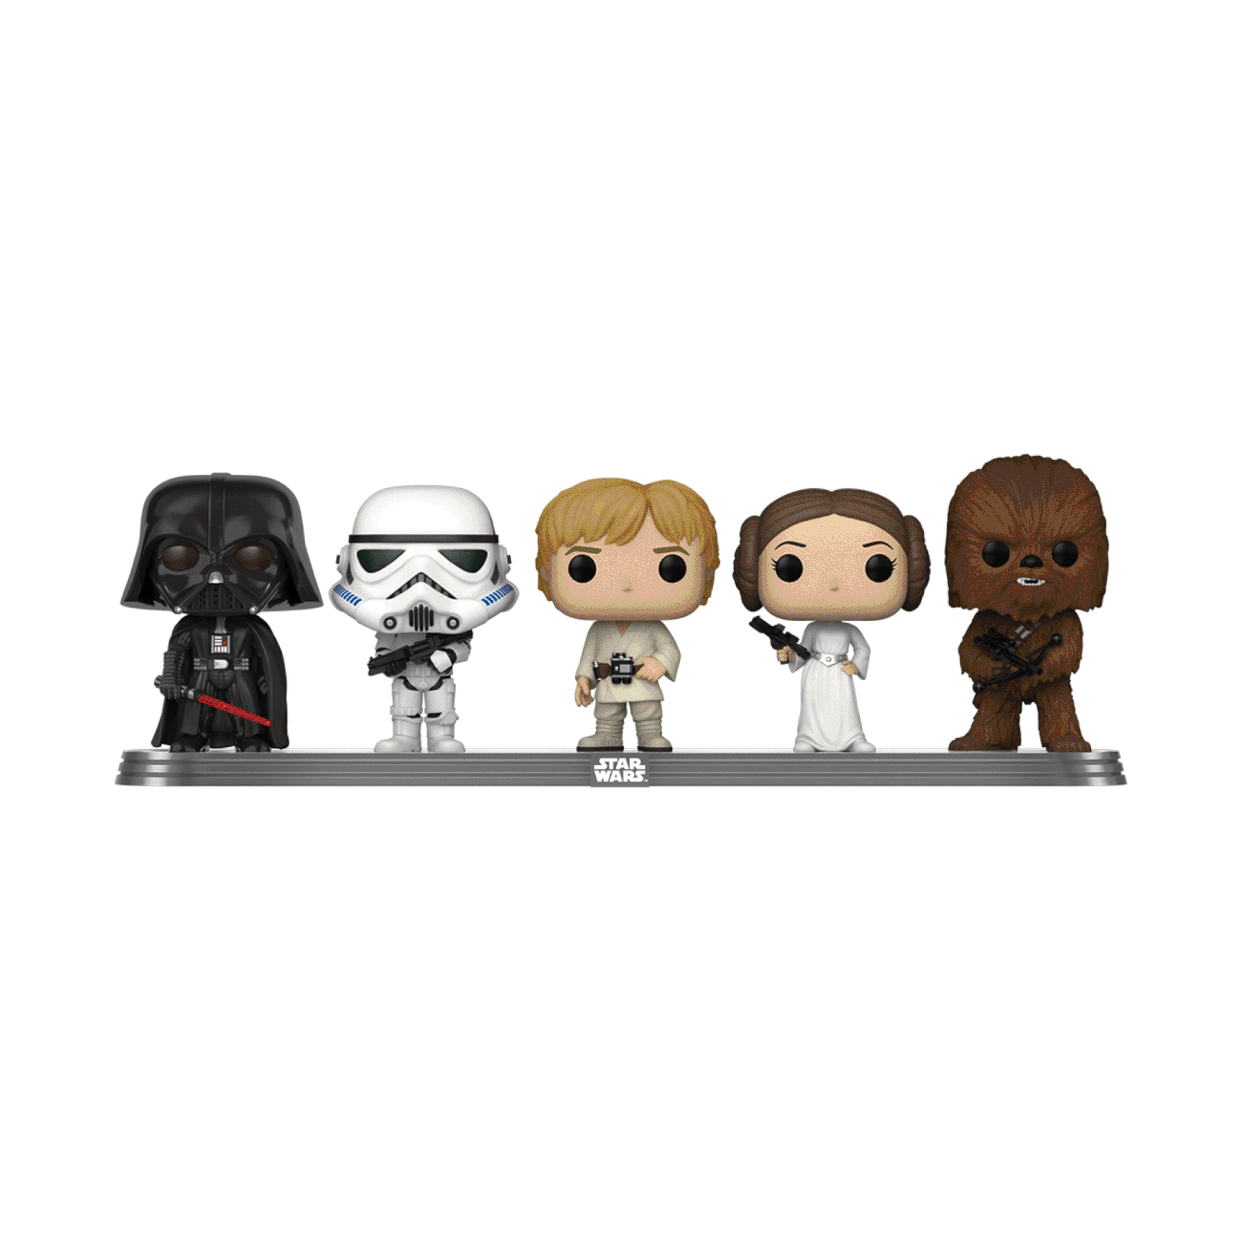 Exclusive preview of Funko and Loungefly&#39;s lineup for Star Wars Day 2022. (Funko: Images used with permission)